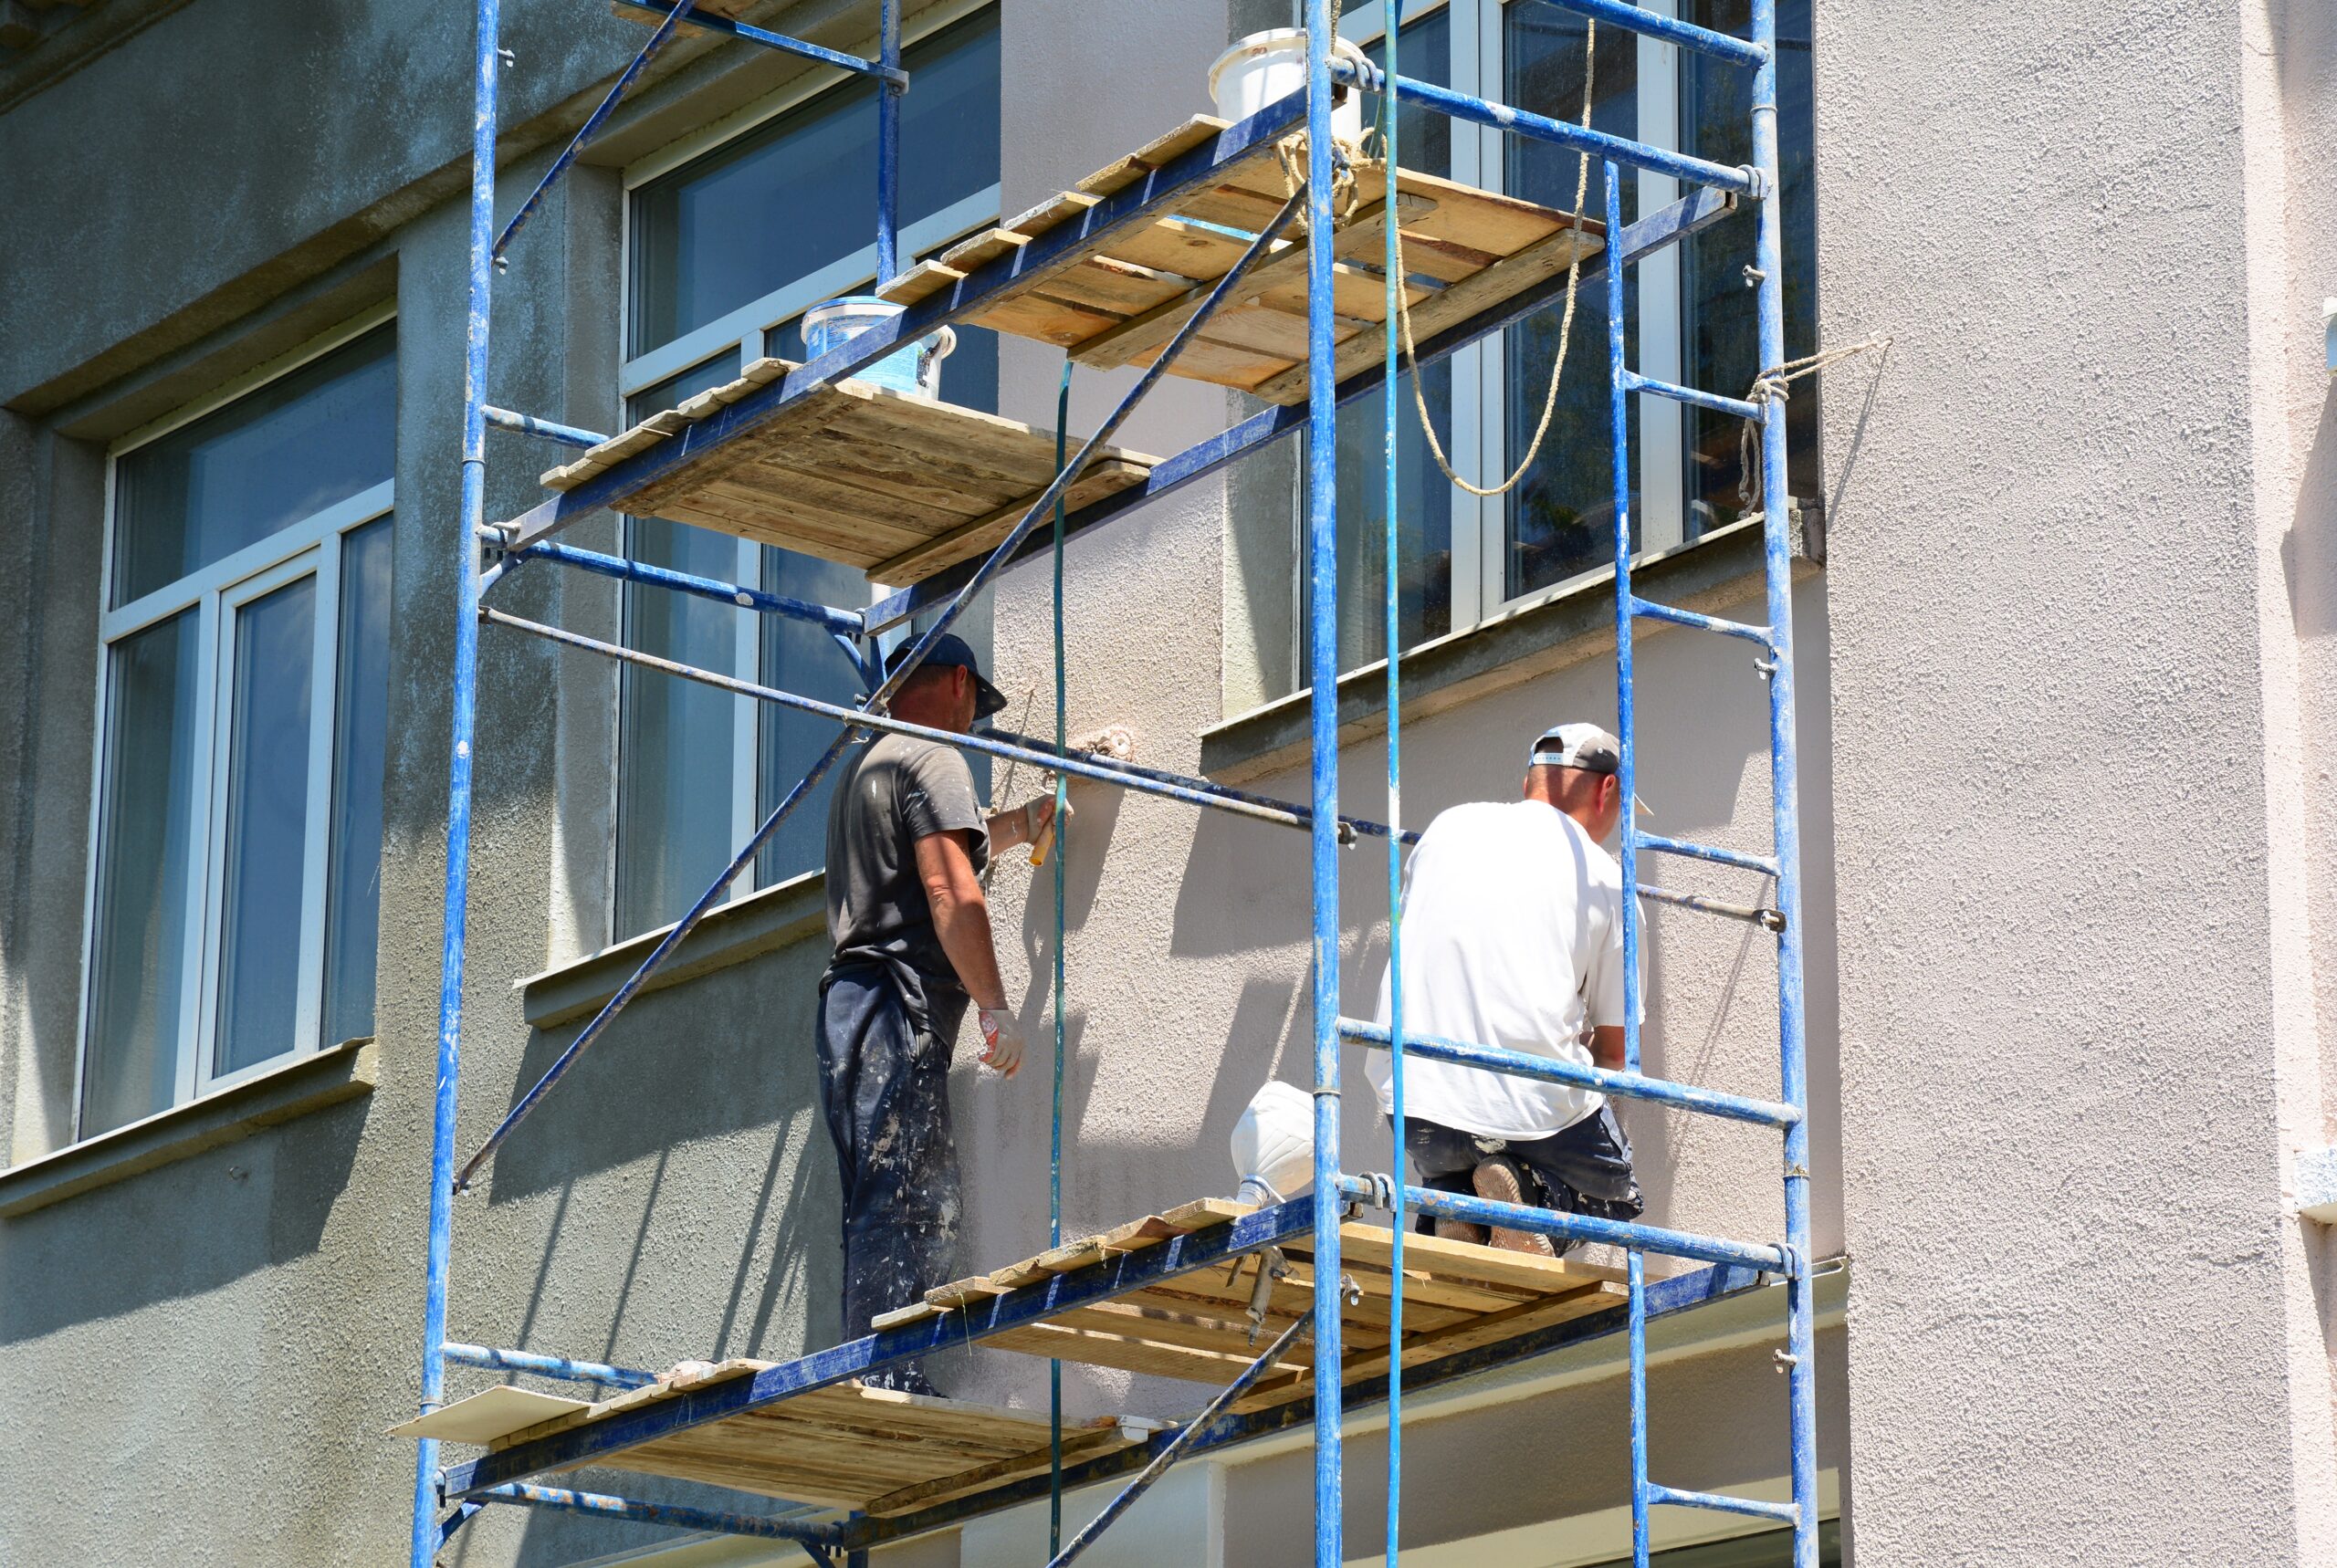 Painting stucco exterior walls. The building contractors are plastering and painting a stucco facade of a house.